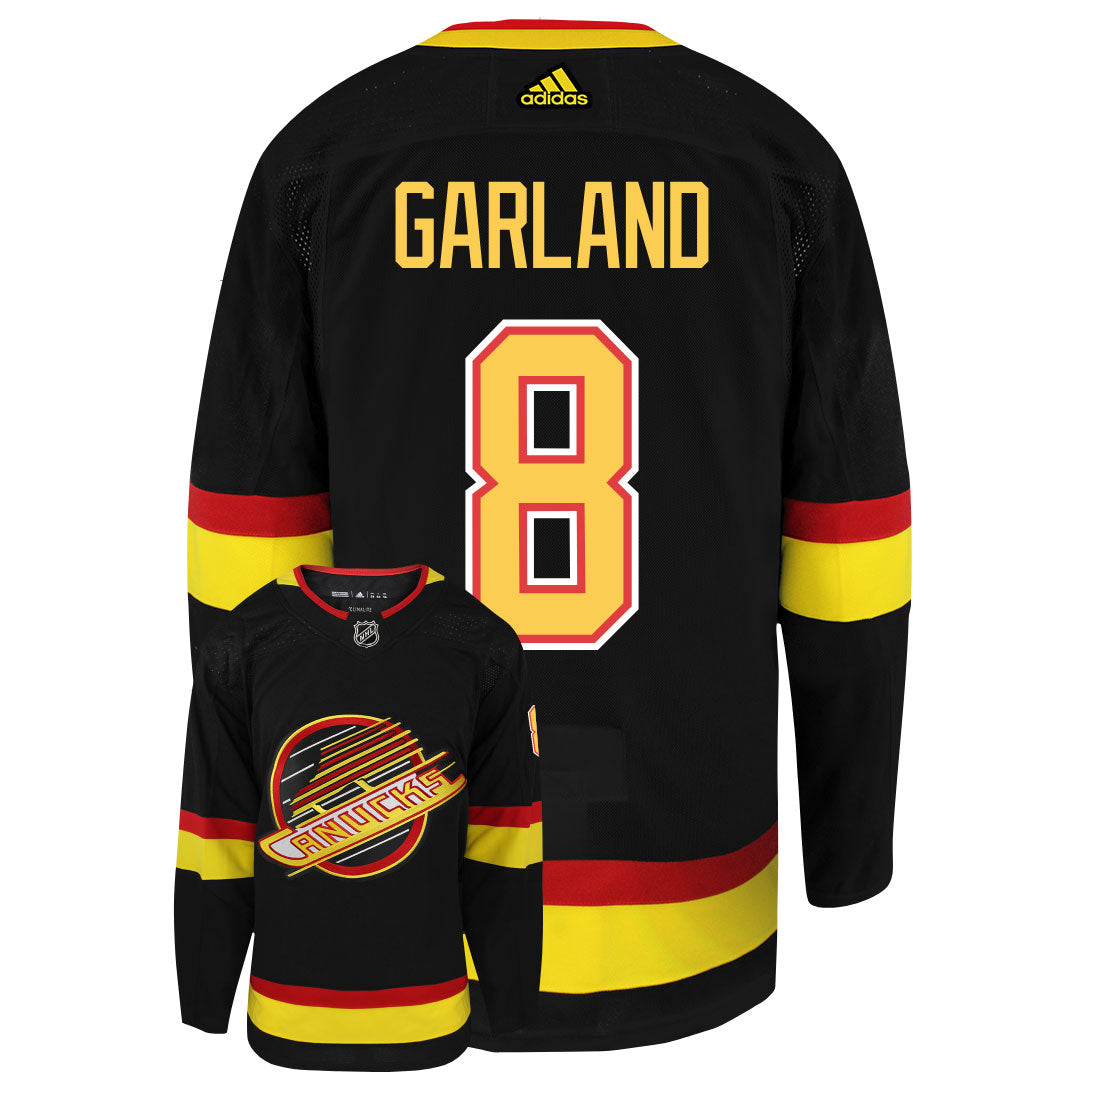 Conor Garland Vancouver Canucks Adidas Primegreen Authentic Third Alternate NHL Hockey Jersey - Back/Front View